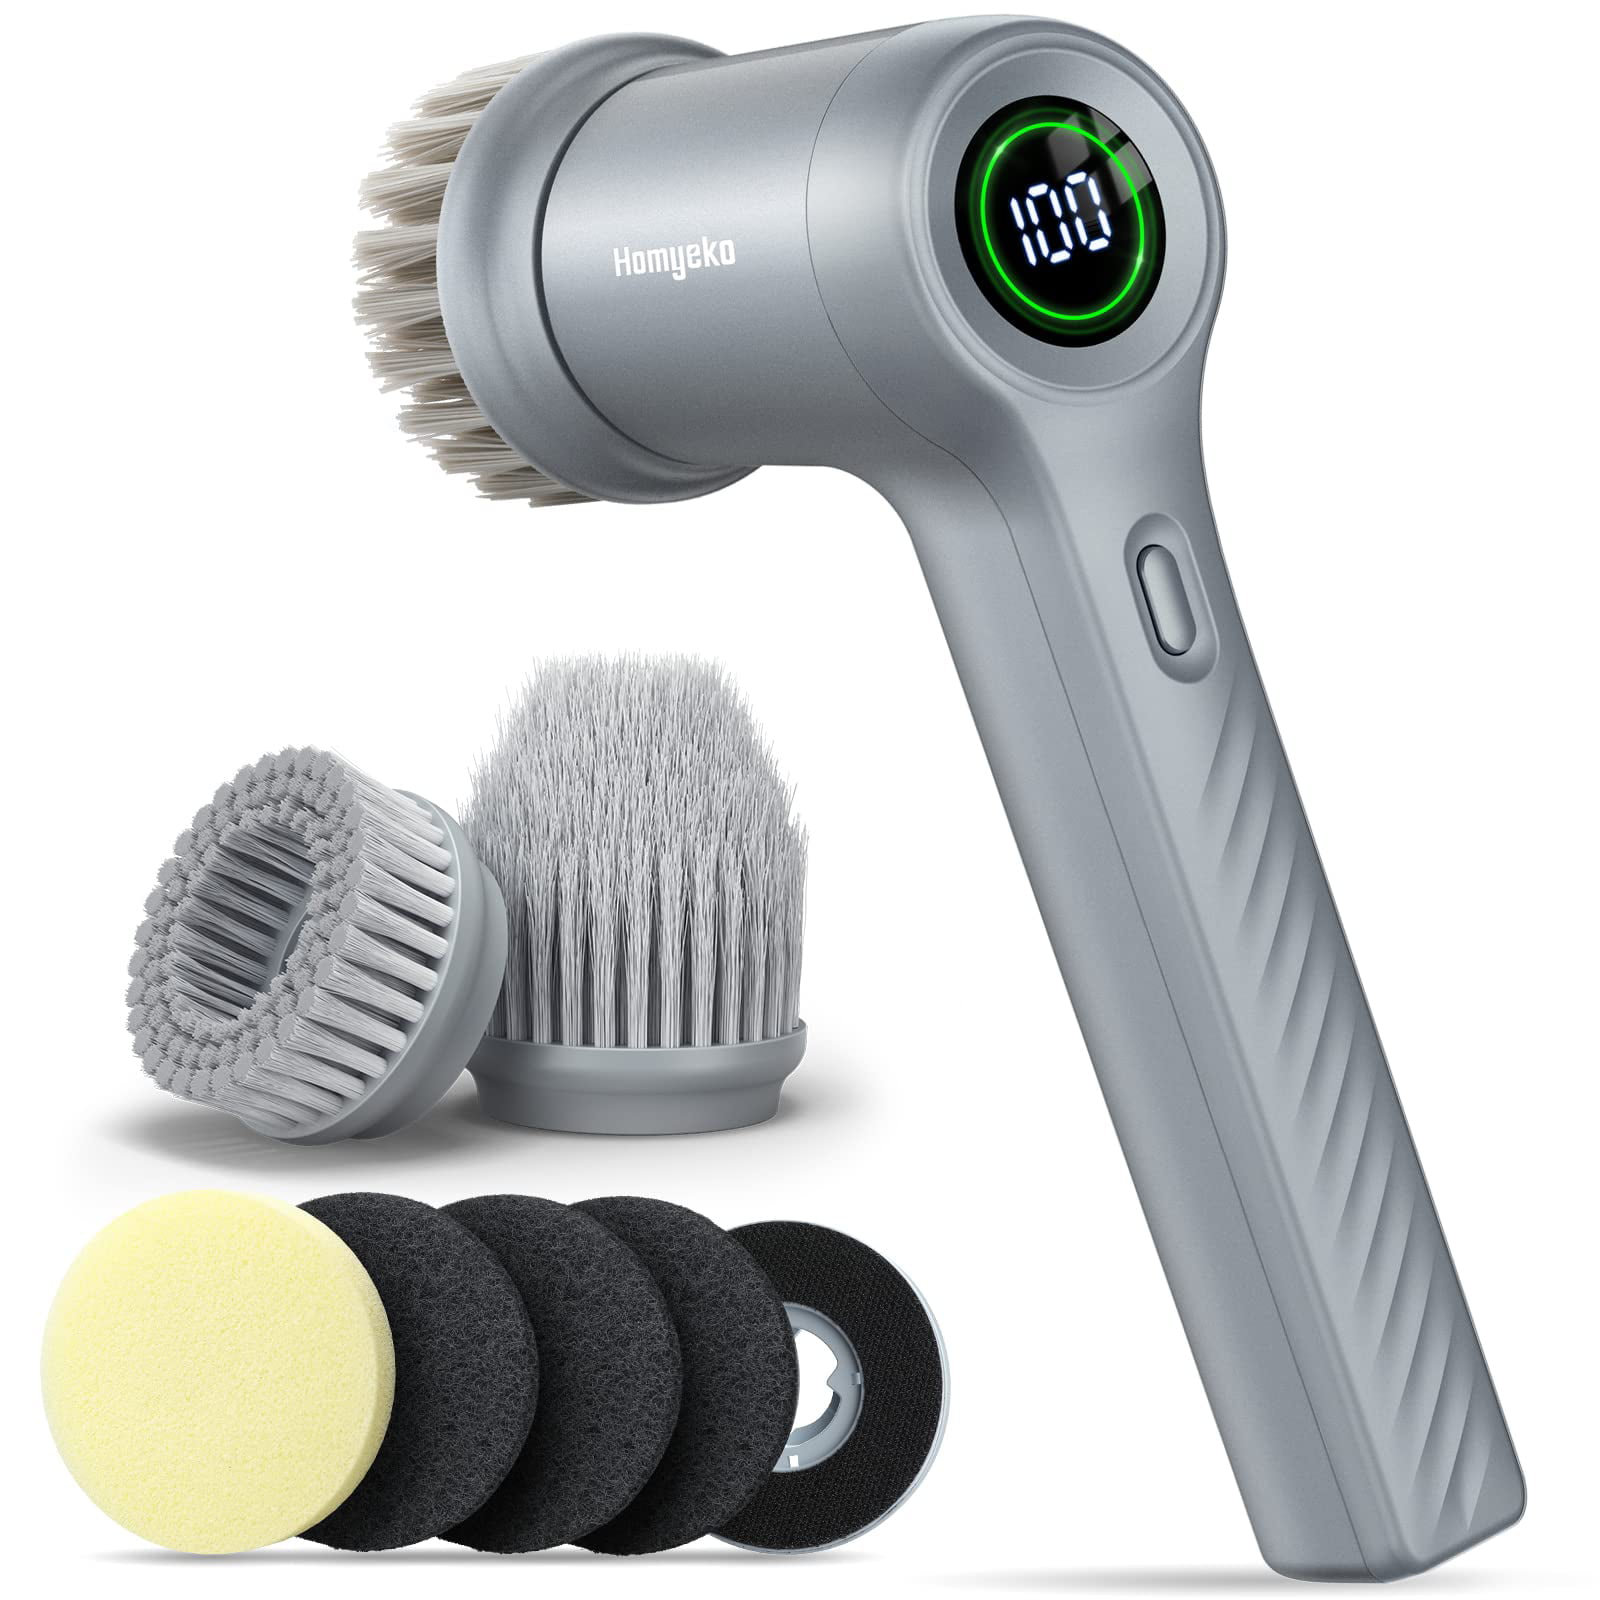 VEVOR Electric Spin Scrubber, Cordless Electric Cleaning Brush with Auto  Detergent Dispenser & 2 Adjustable Speeds, Portable Power Shower Scrubber  with 5 Replaceable Brush Heads for Bathroom, Tub